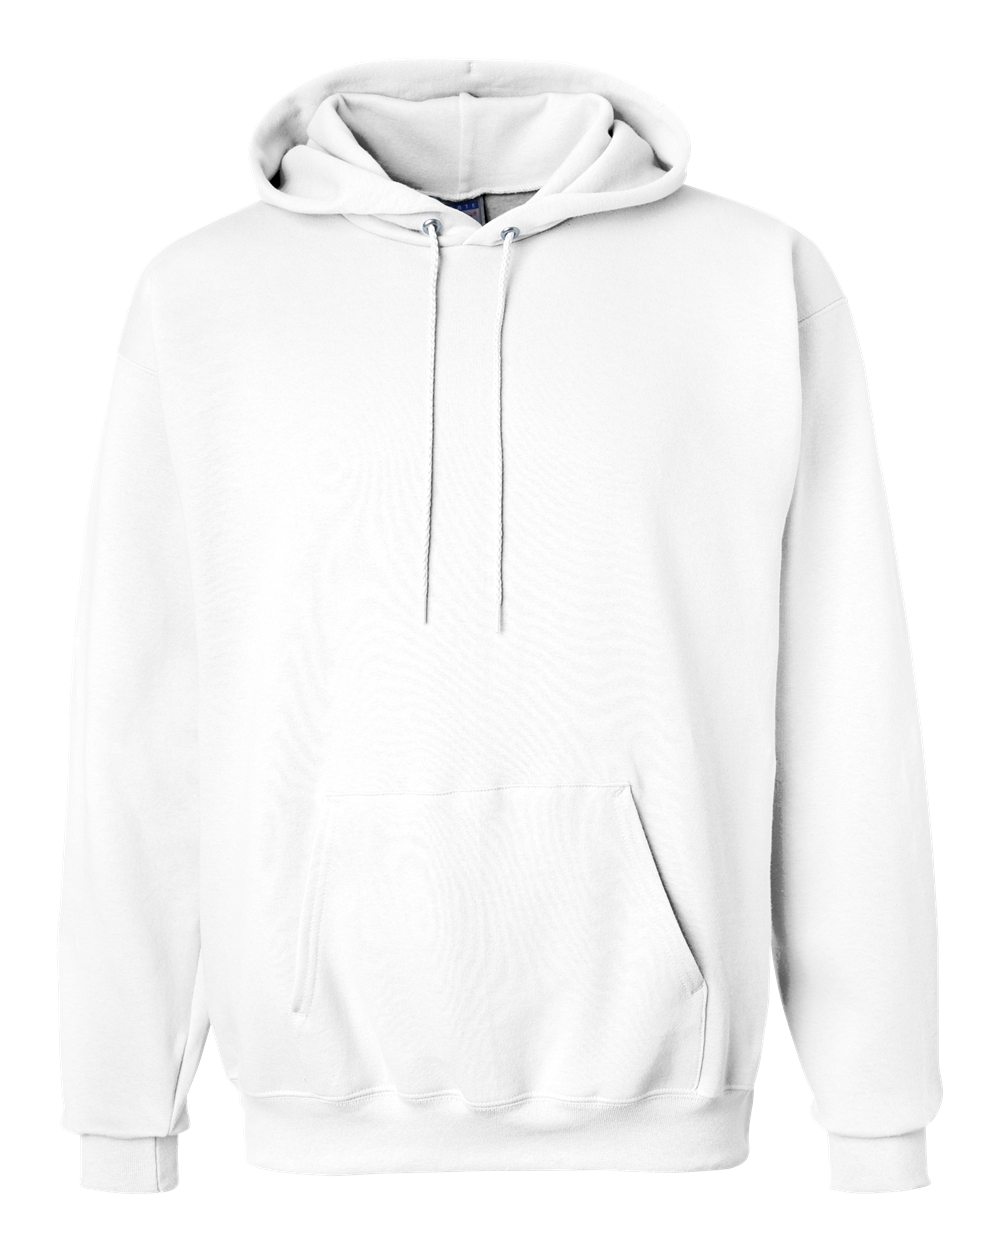 all white zip up hoodie off 53% - www 